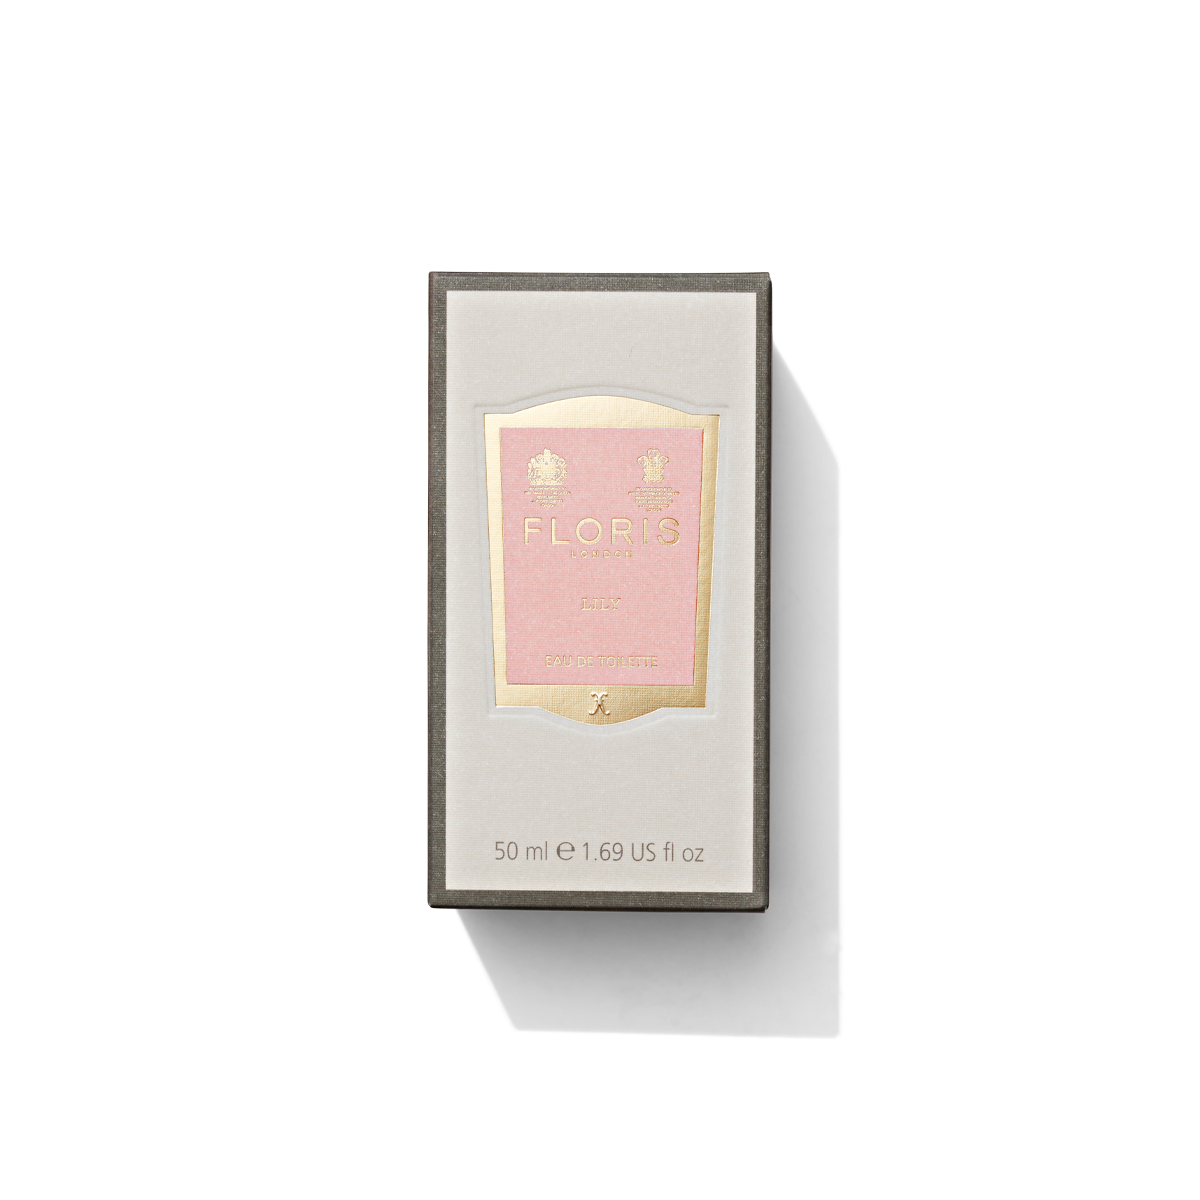 Medium grey box with light pink and gold label containing Lily Eau de Toilette 